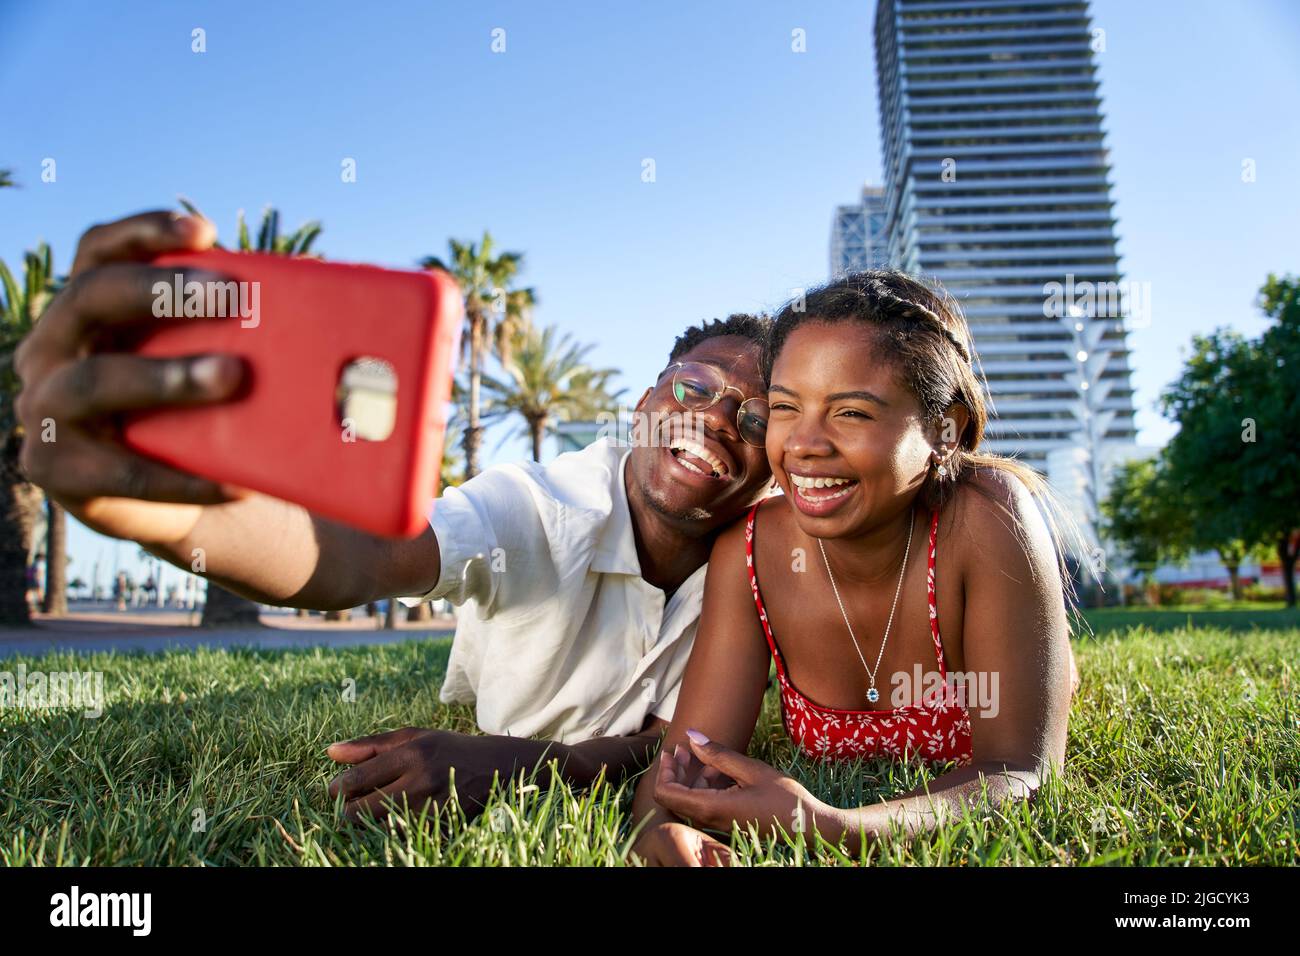 A cheerful young African American couple taking a selfie portrait with their smart phone lying on the grass in the city park. Smiling boy and girl Stock Photo